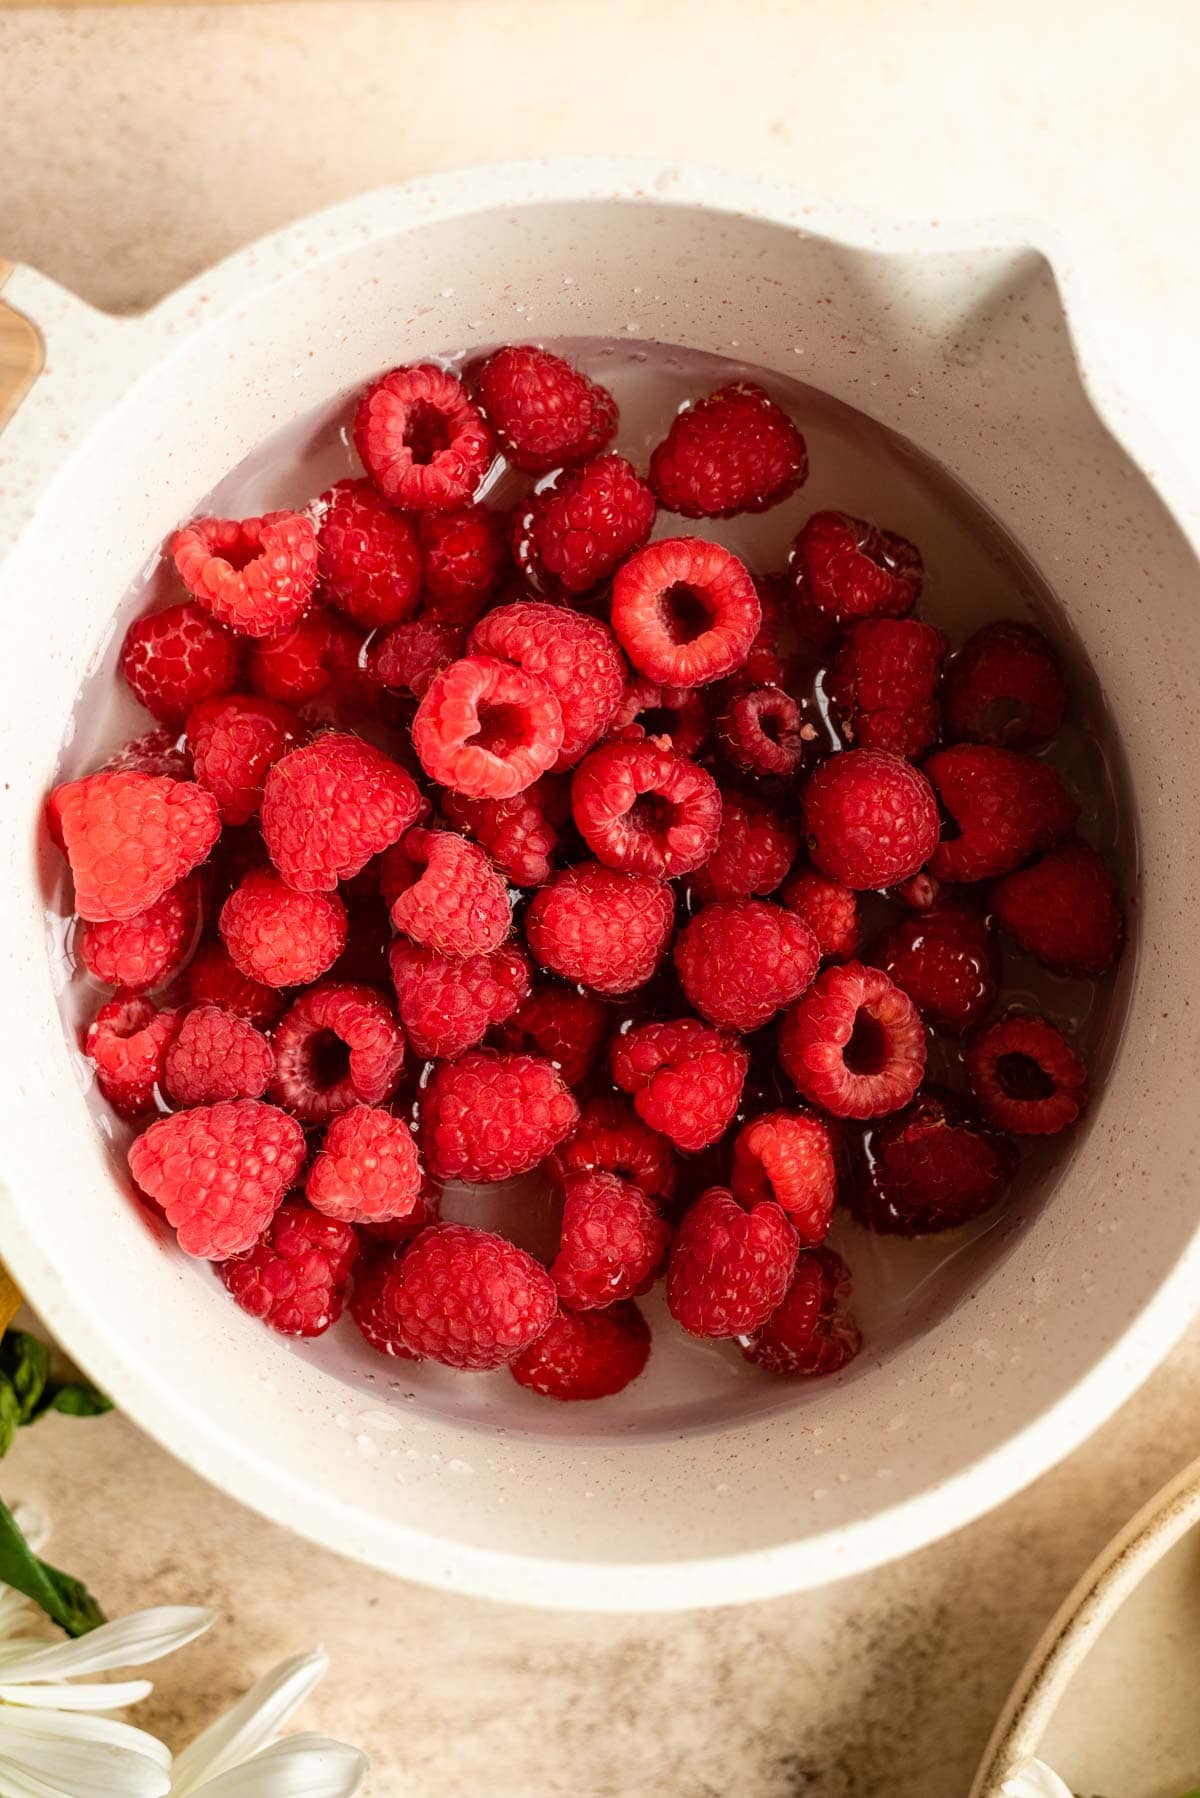 Raspberries, sugar, and water in a small white pot.